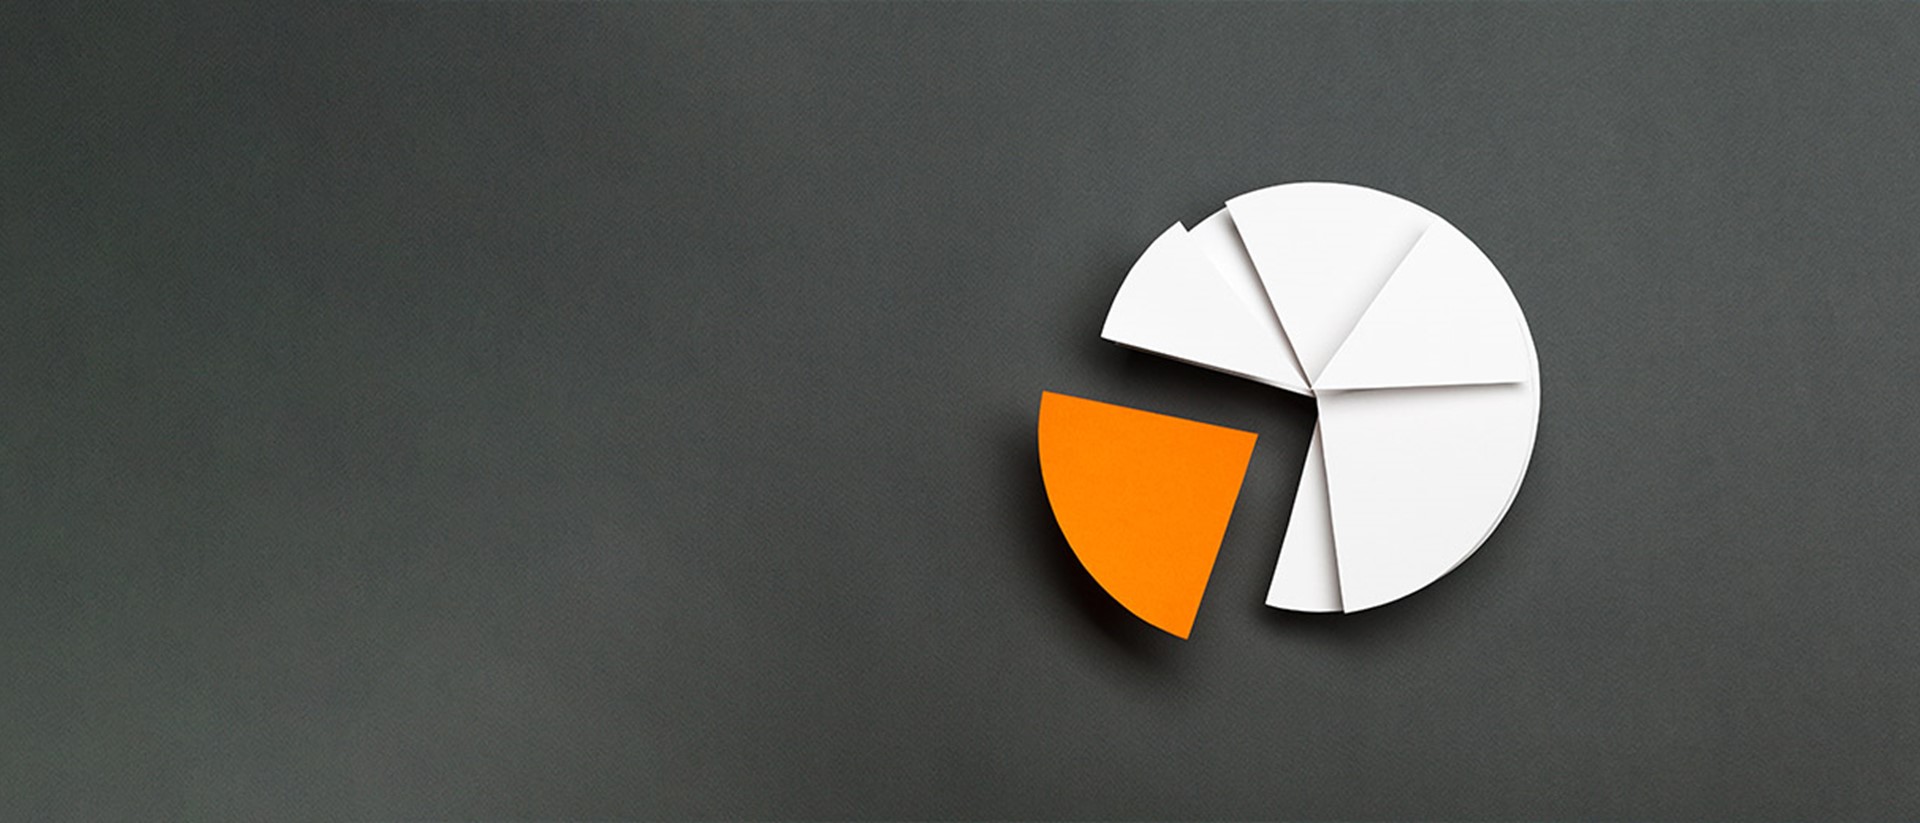 Image of a white pie chart with an orange slice taken out of it on a black background